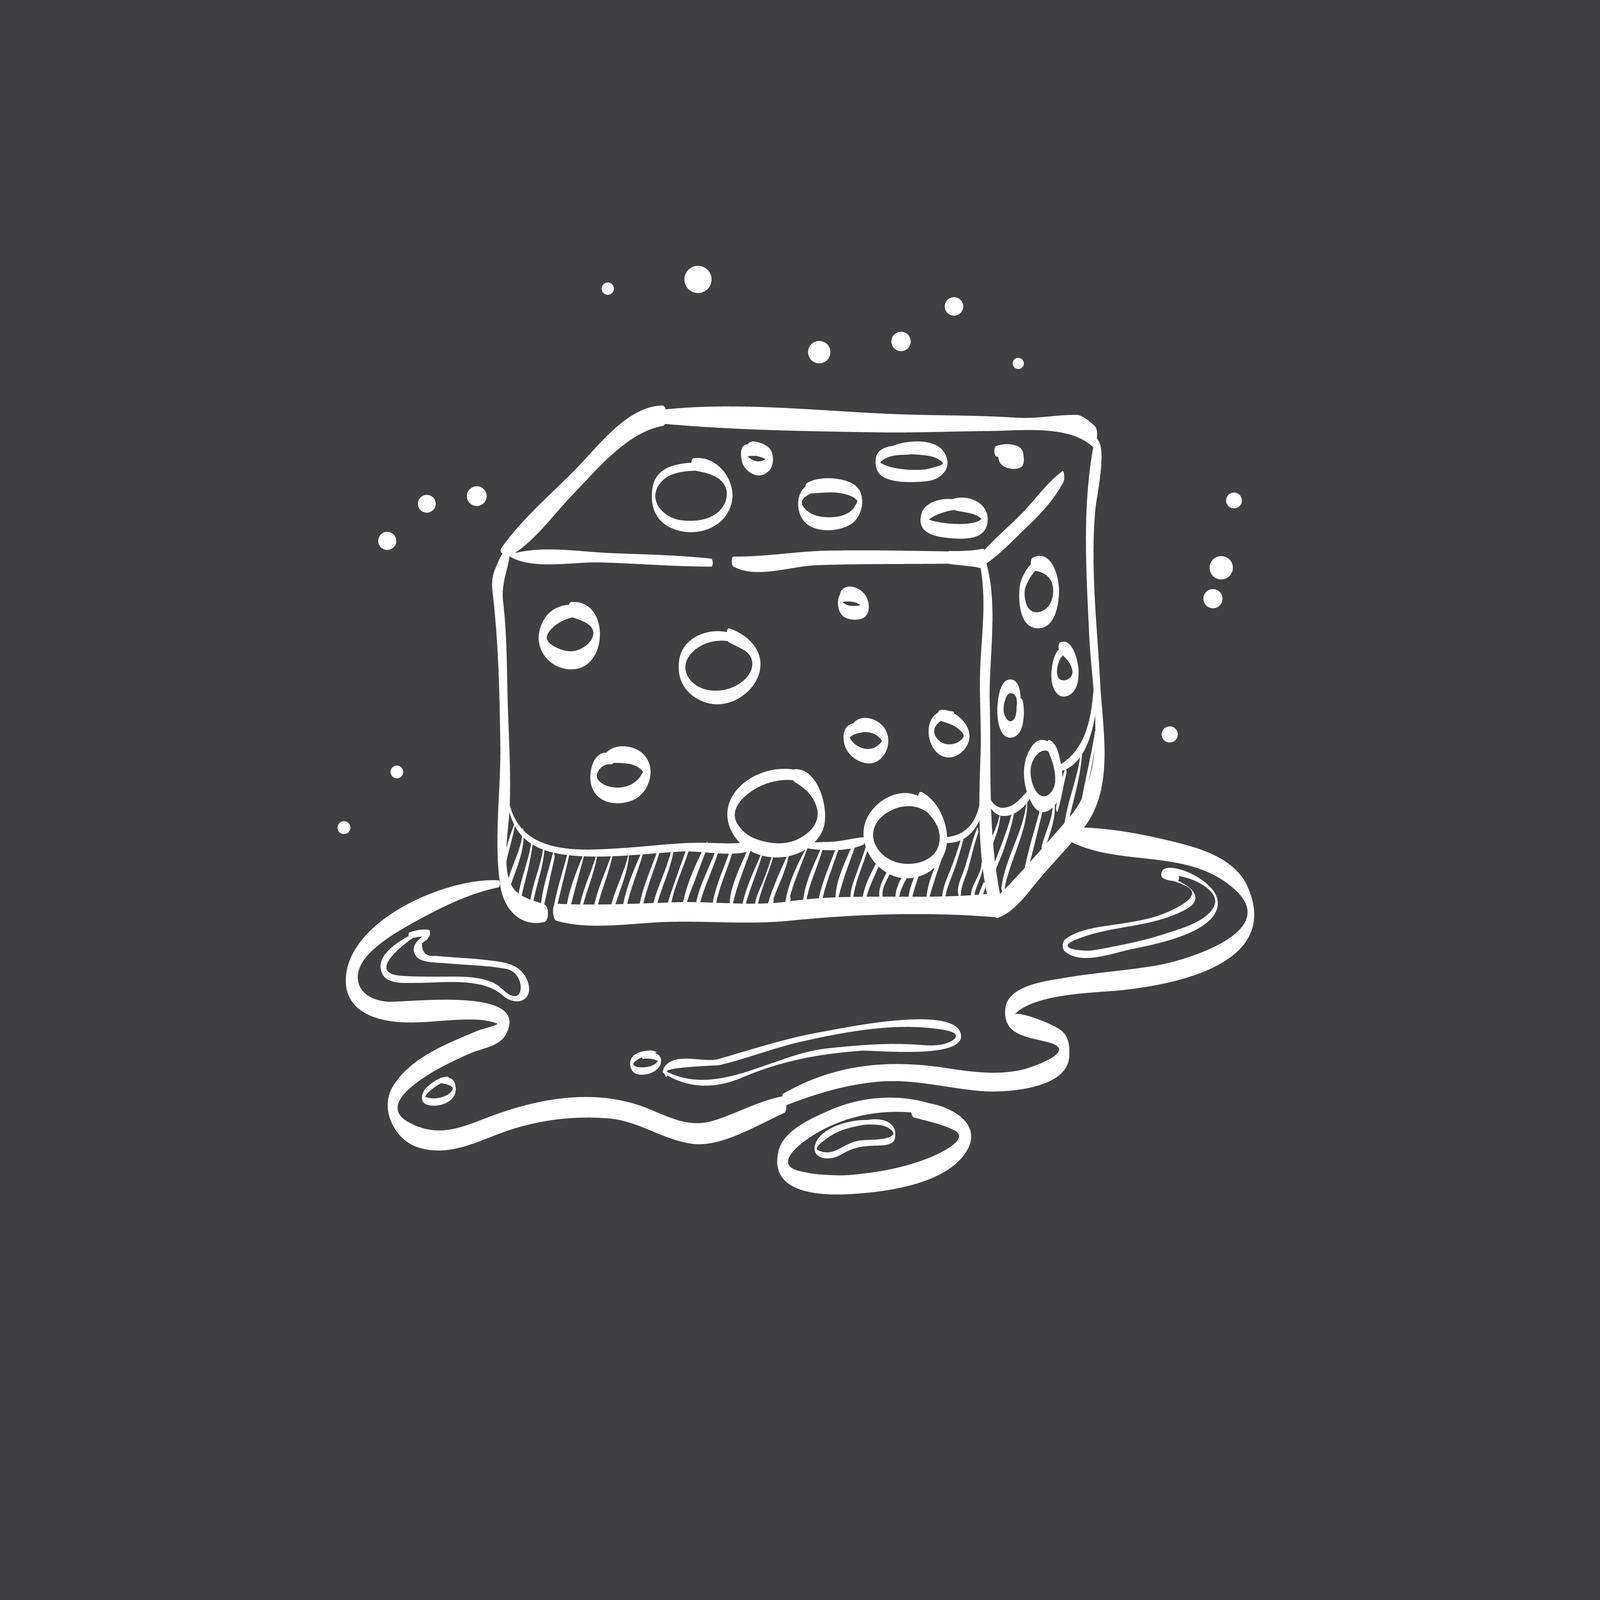 Sketch icon in black - Sponge cleaning by puruan